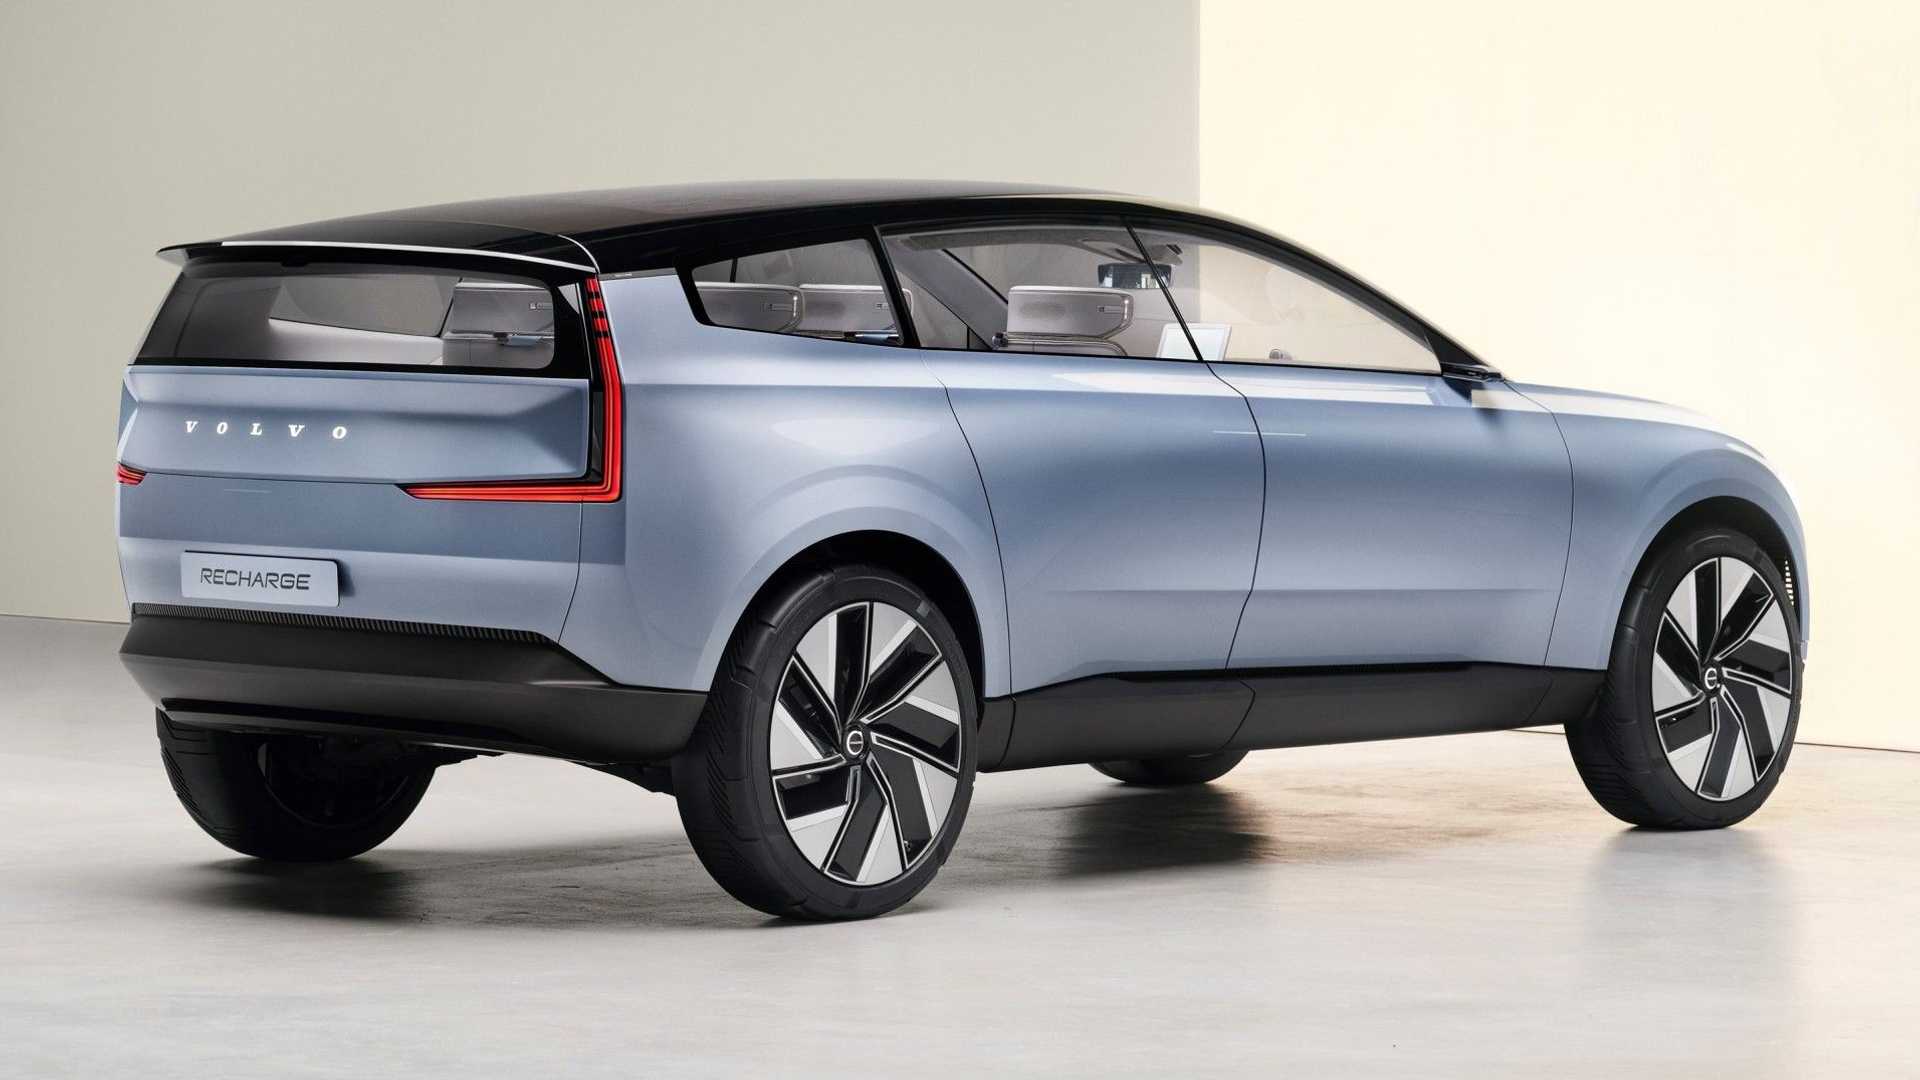 volvo-concept-recharge-exterior-right-side-rear.jpg